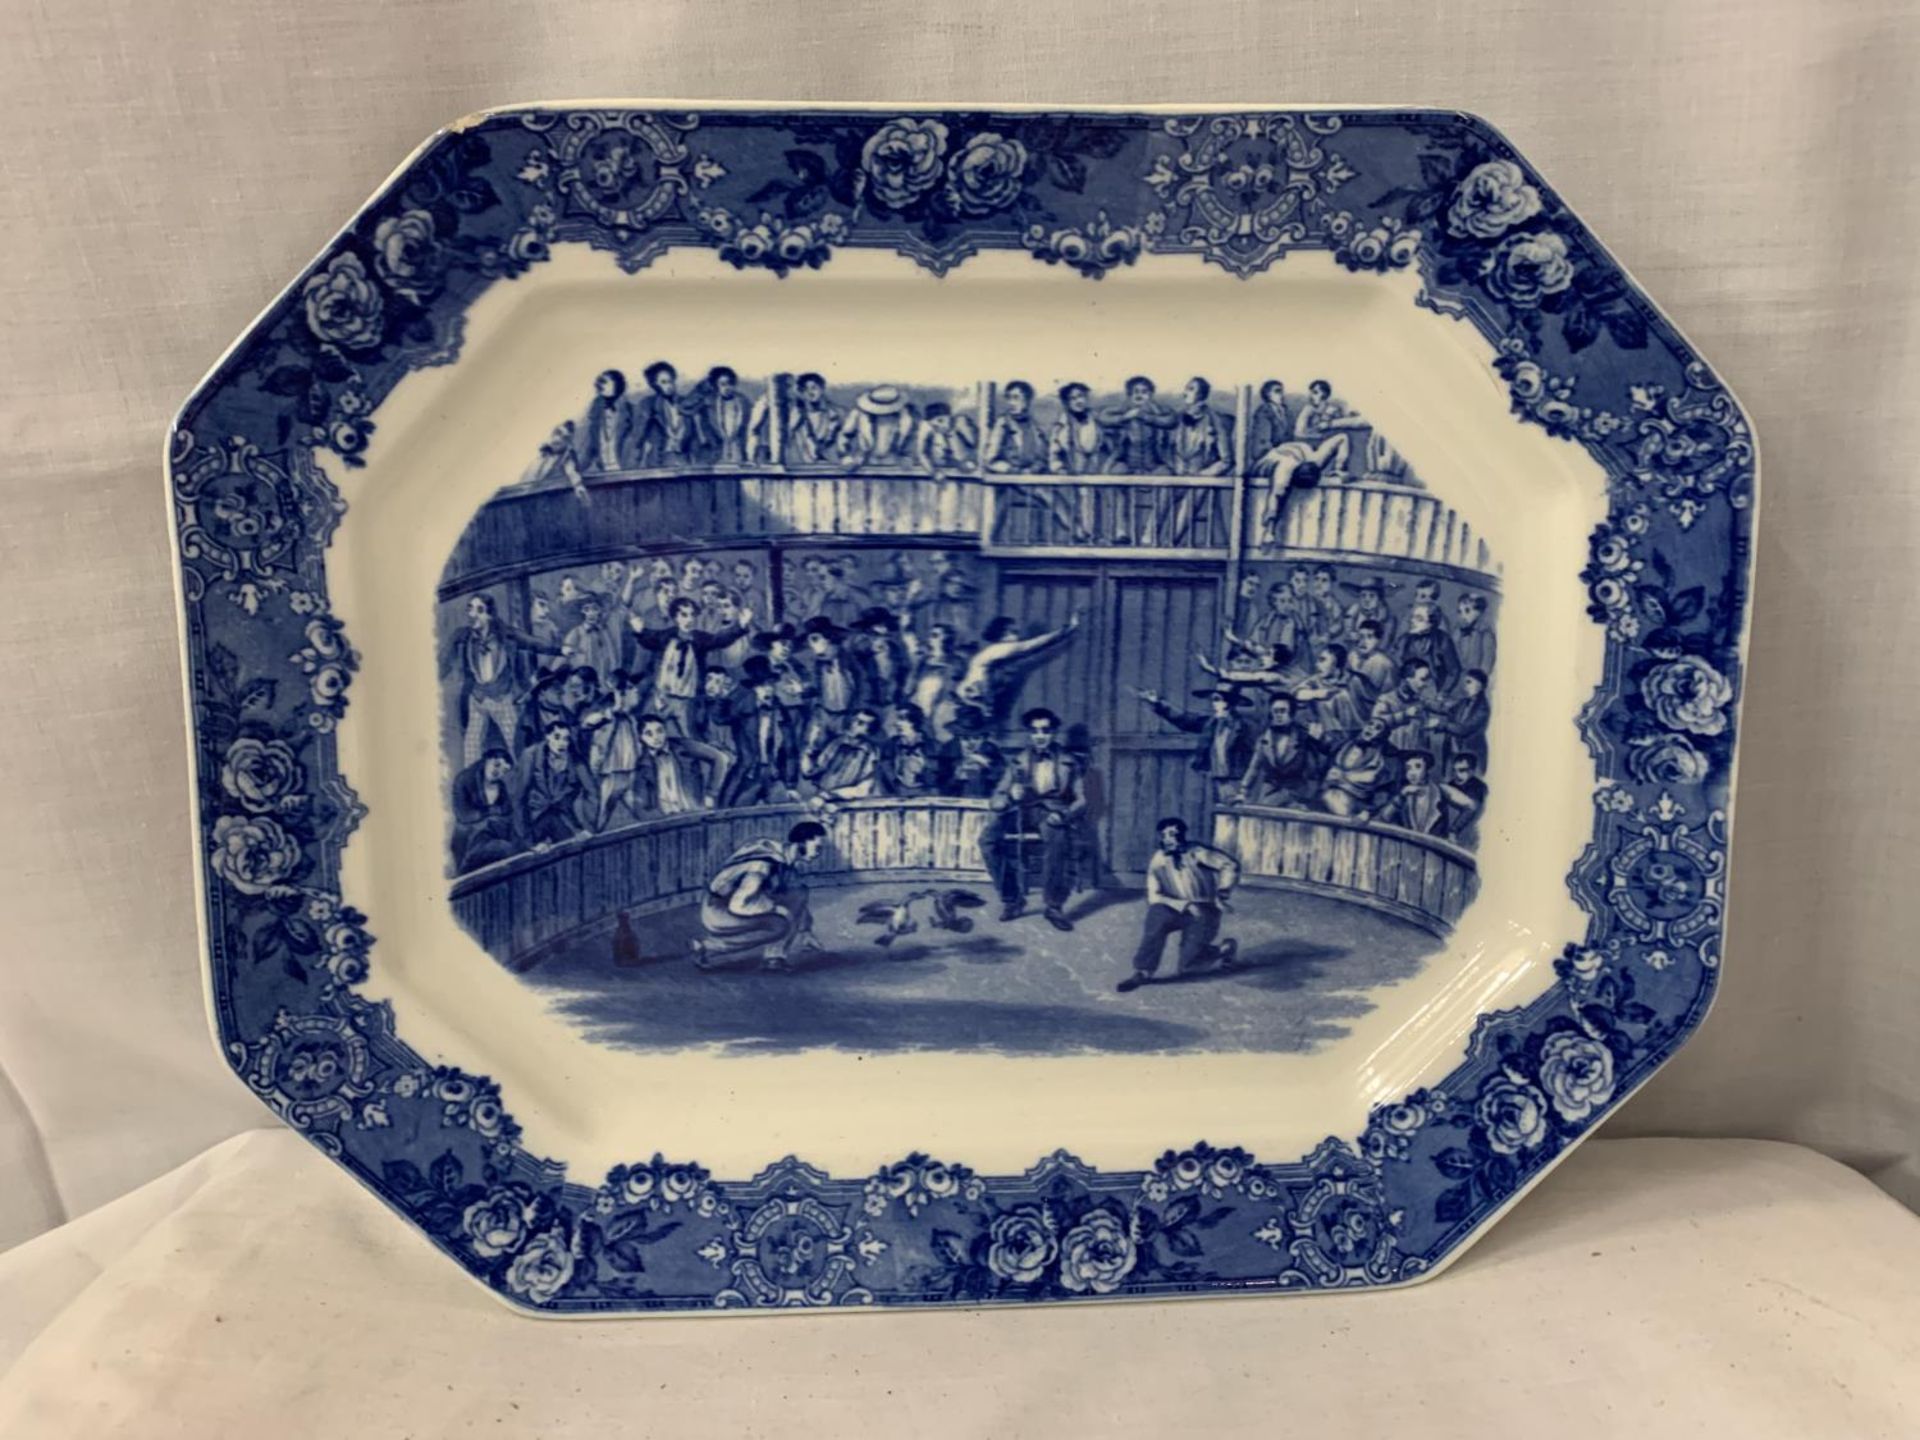 A LARGE BLUE AND WHITE MEAT PLATTER DEPICTING COCK FIGHTING AND STAMPED SPANISH FESTIVITIES 1798